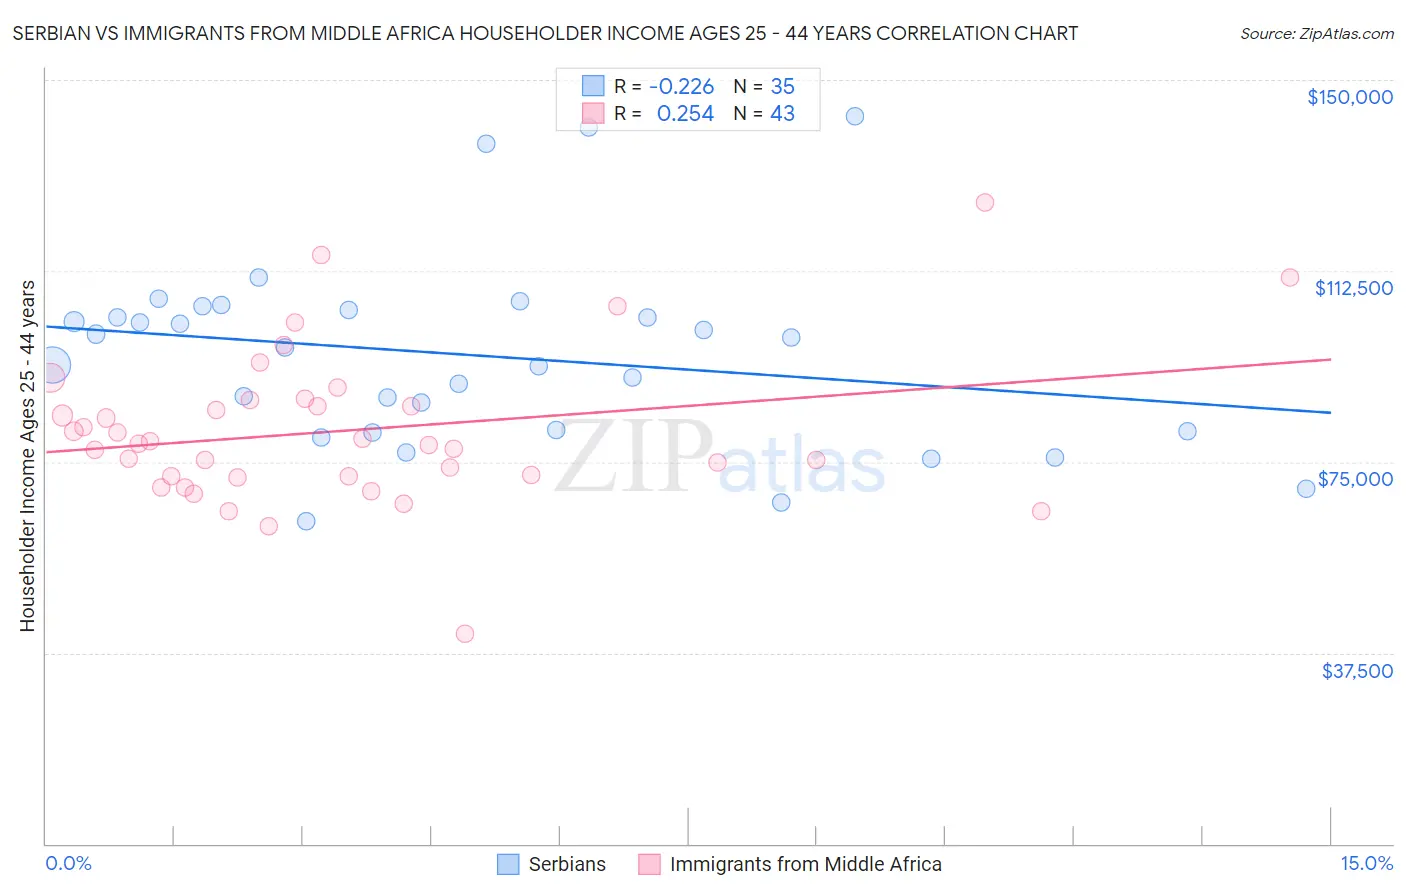 Serbian vs Immigrants from Middle Africa Householder Income Ages 25 - 44 years